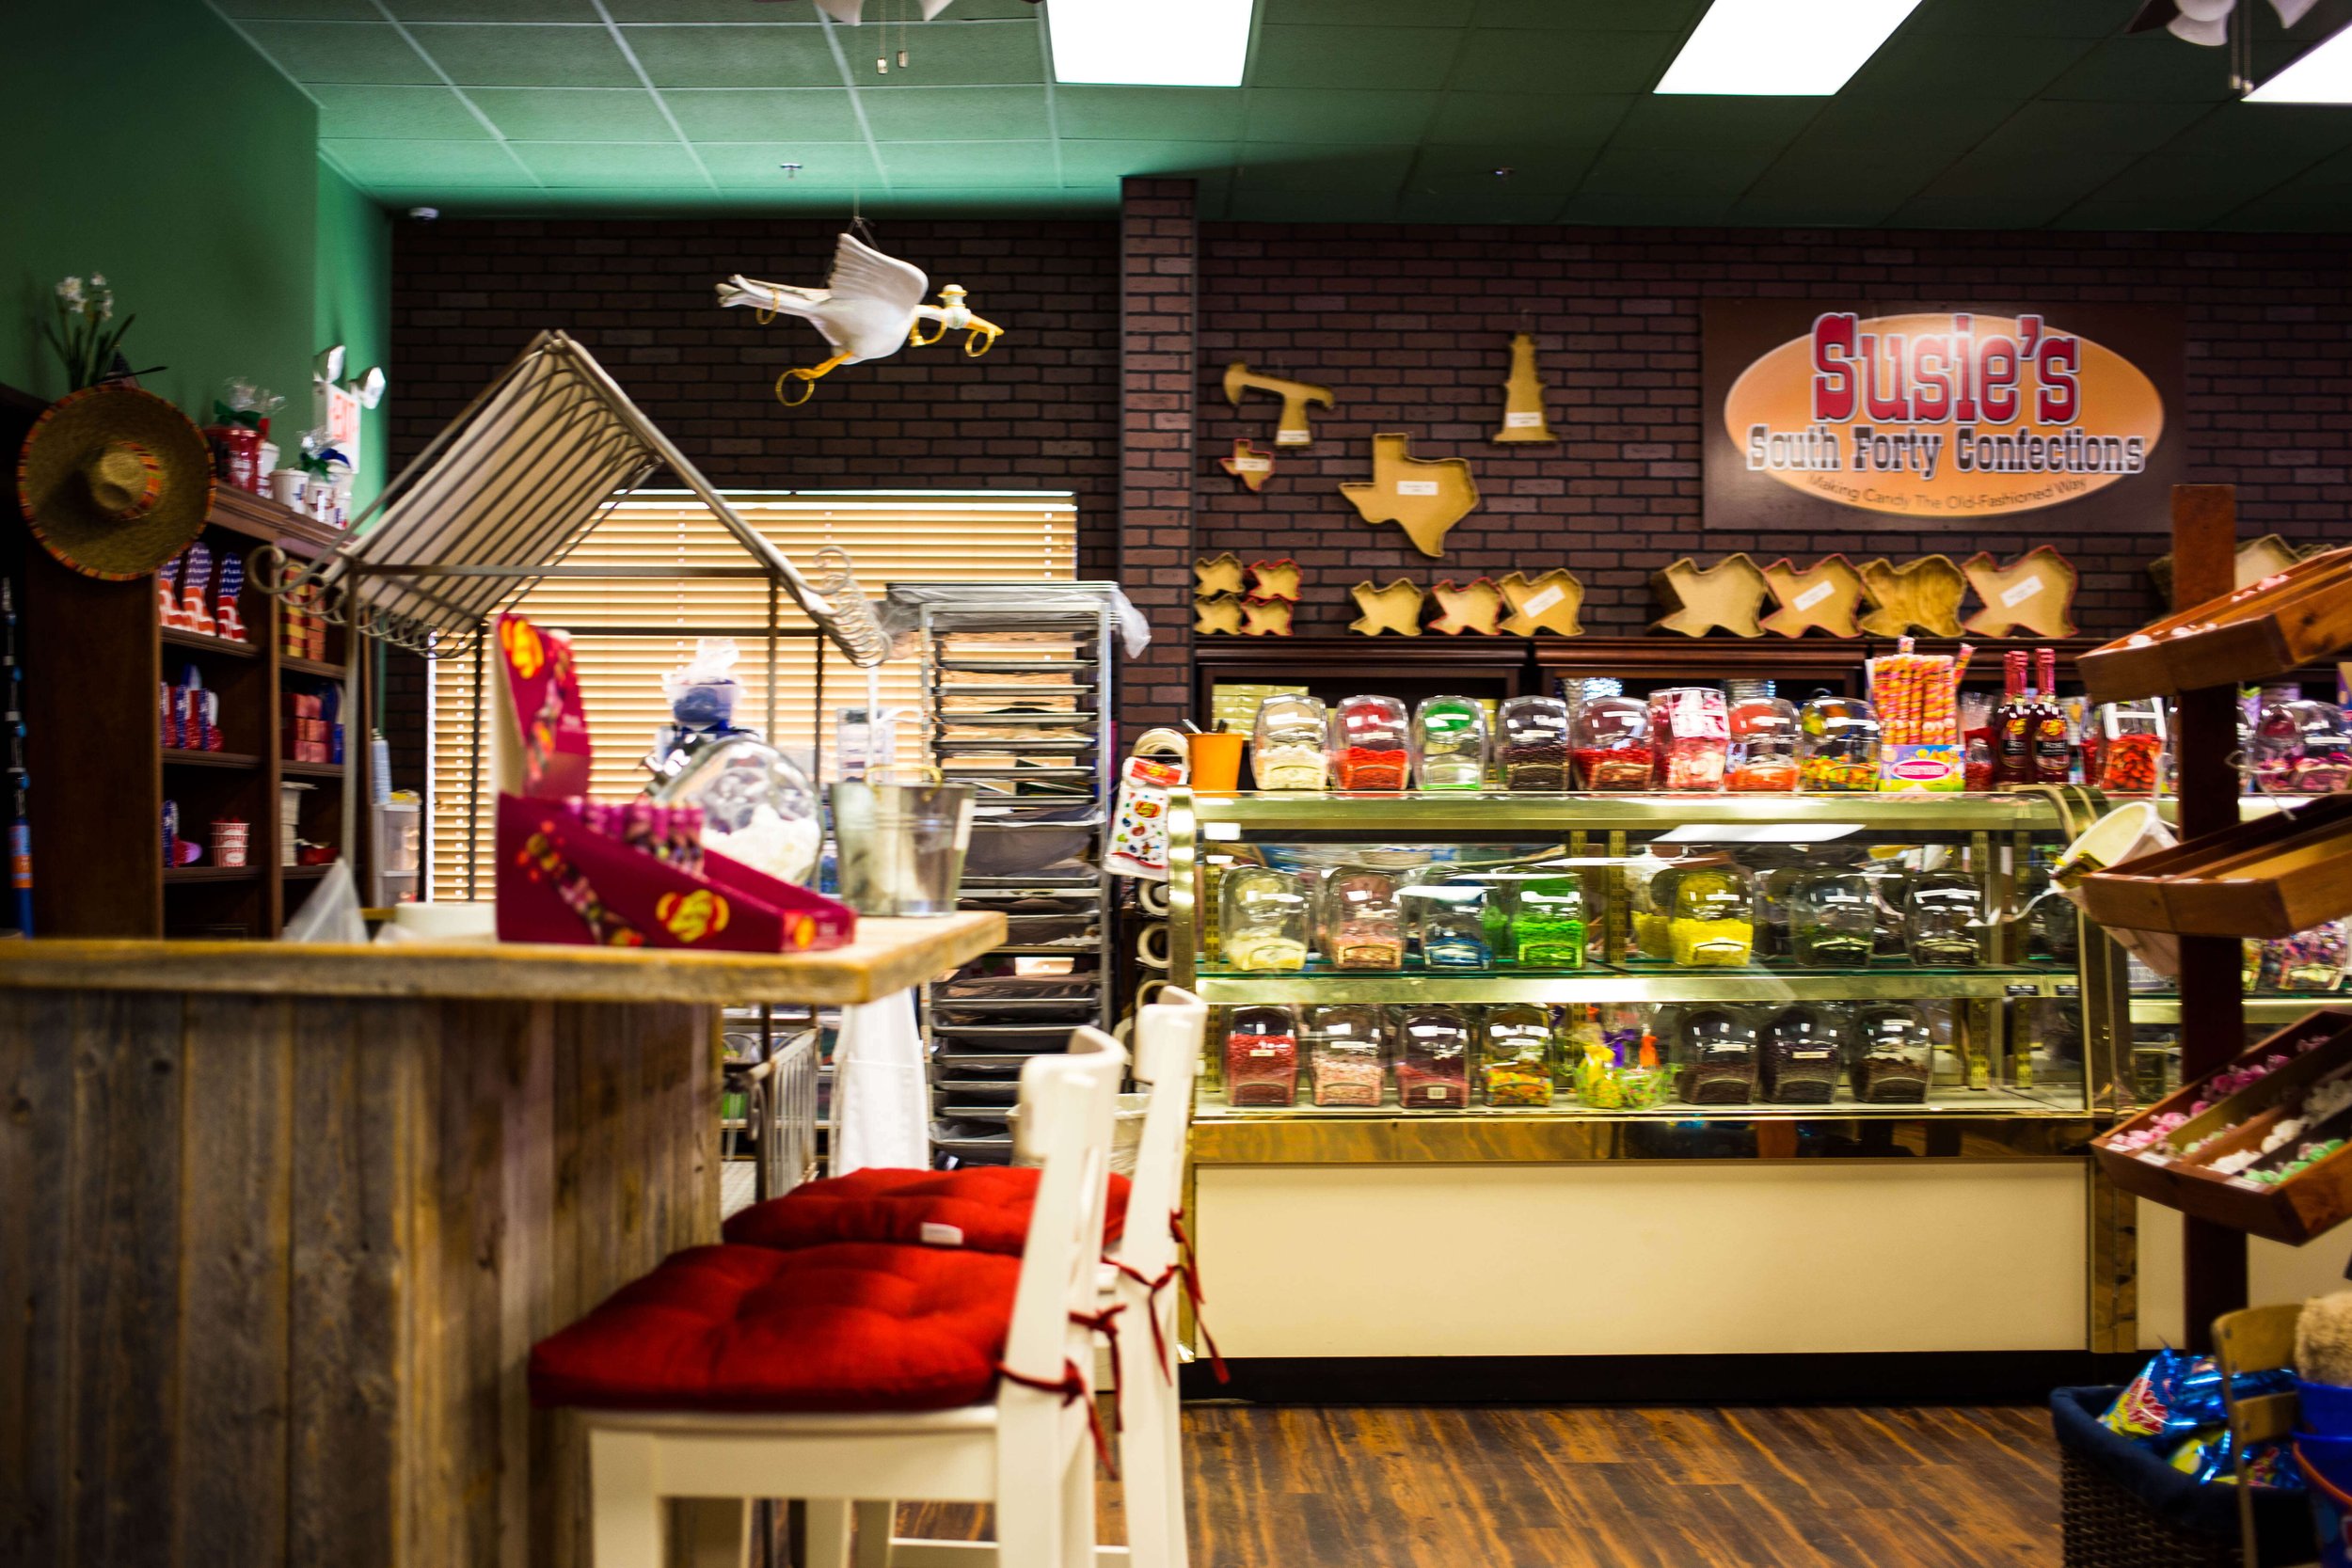 Susie’s South Forty Confections Factory gift shop in Midland, Texas